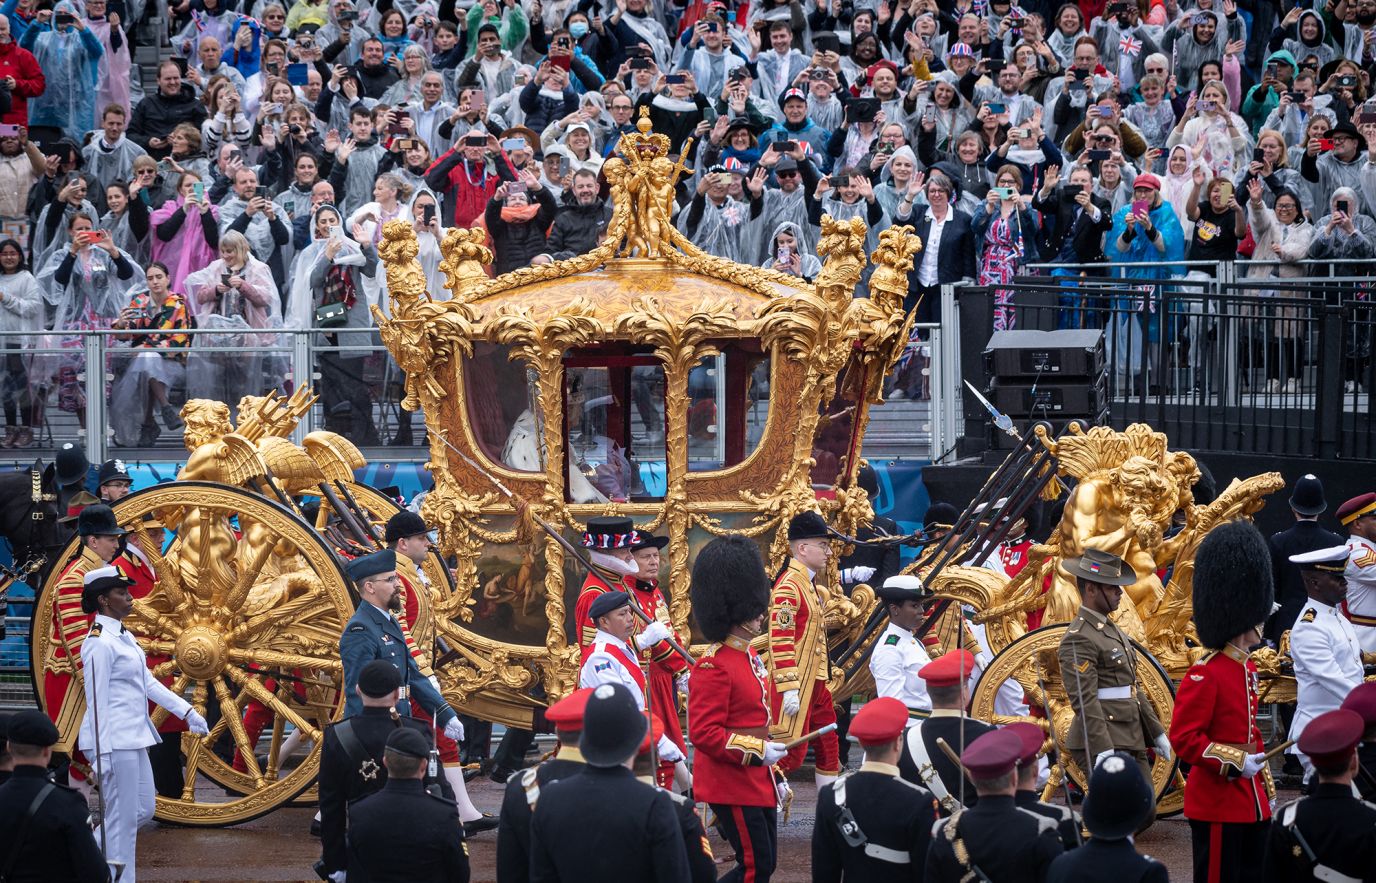 The Gold State Coach that carried the King and Queen <a href="https://www.cnn.com/uk/live-news/king-charles-iii-coronation-ckc-intl-gbr/h_29ede4c8497c4ddfe0103e34a729b328" target="_blank">is incredibly heavy</a>, weighing 4 tons. Because of its weight, it can travel only at a walking pace.